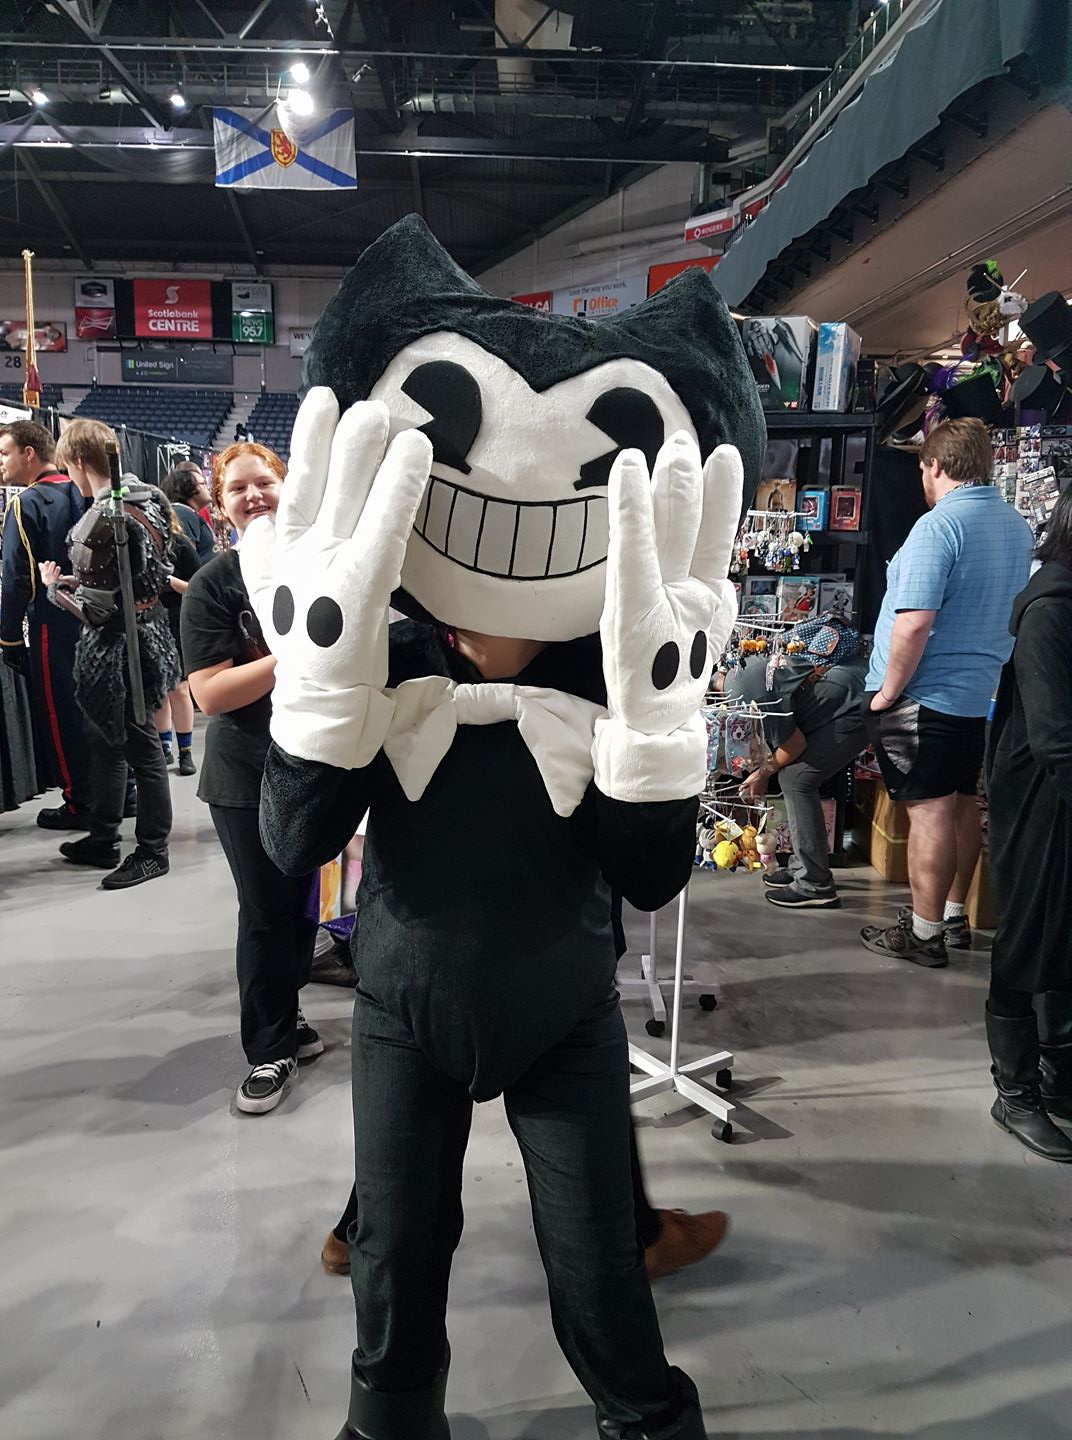 The costume for Bendy